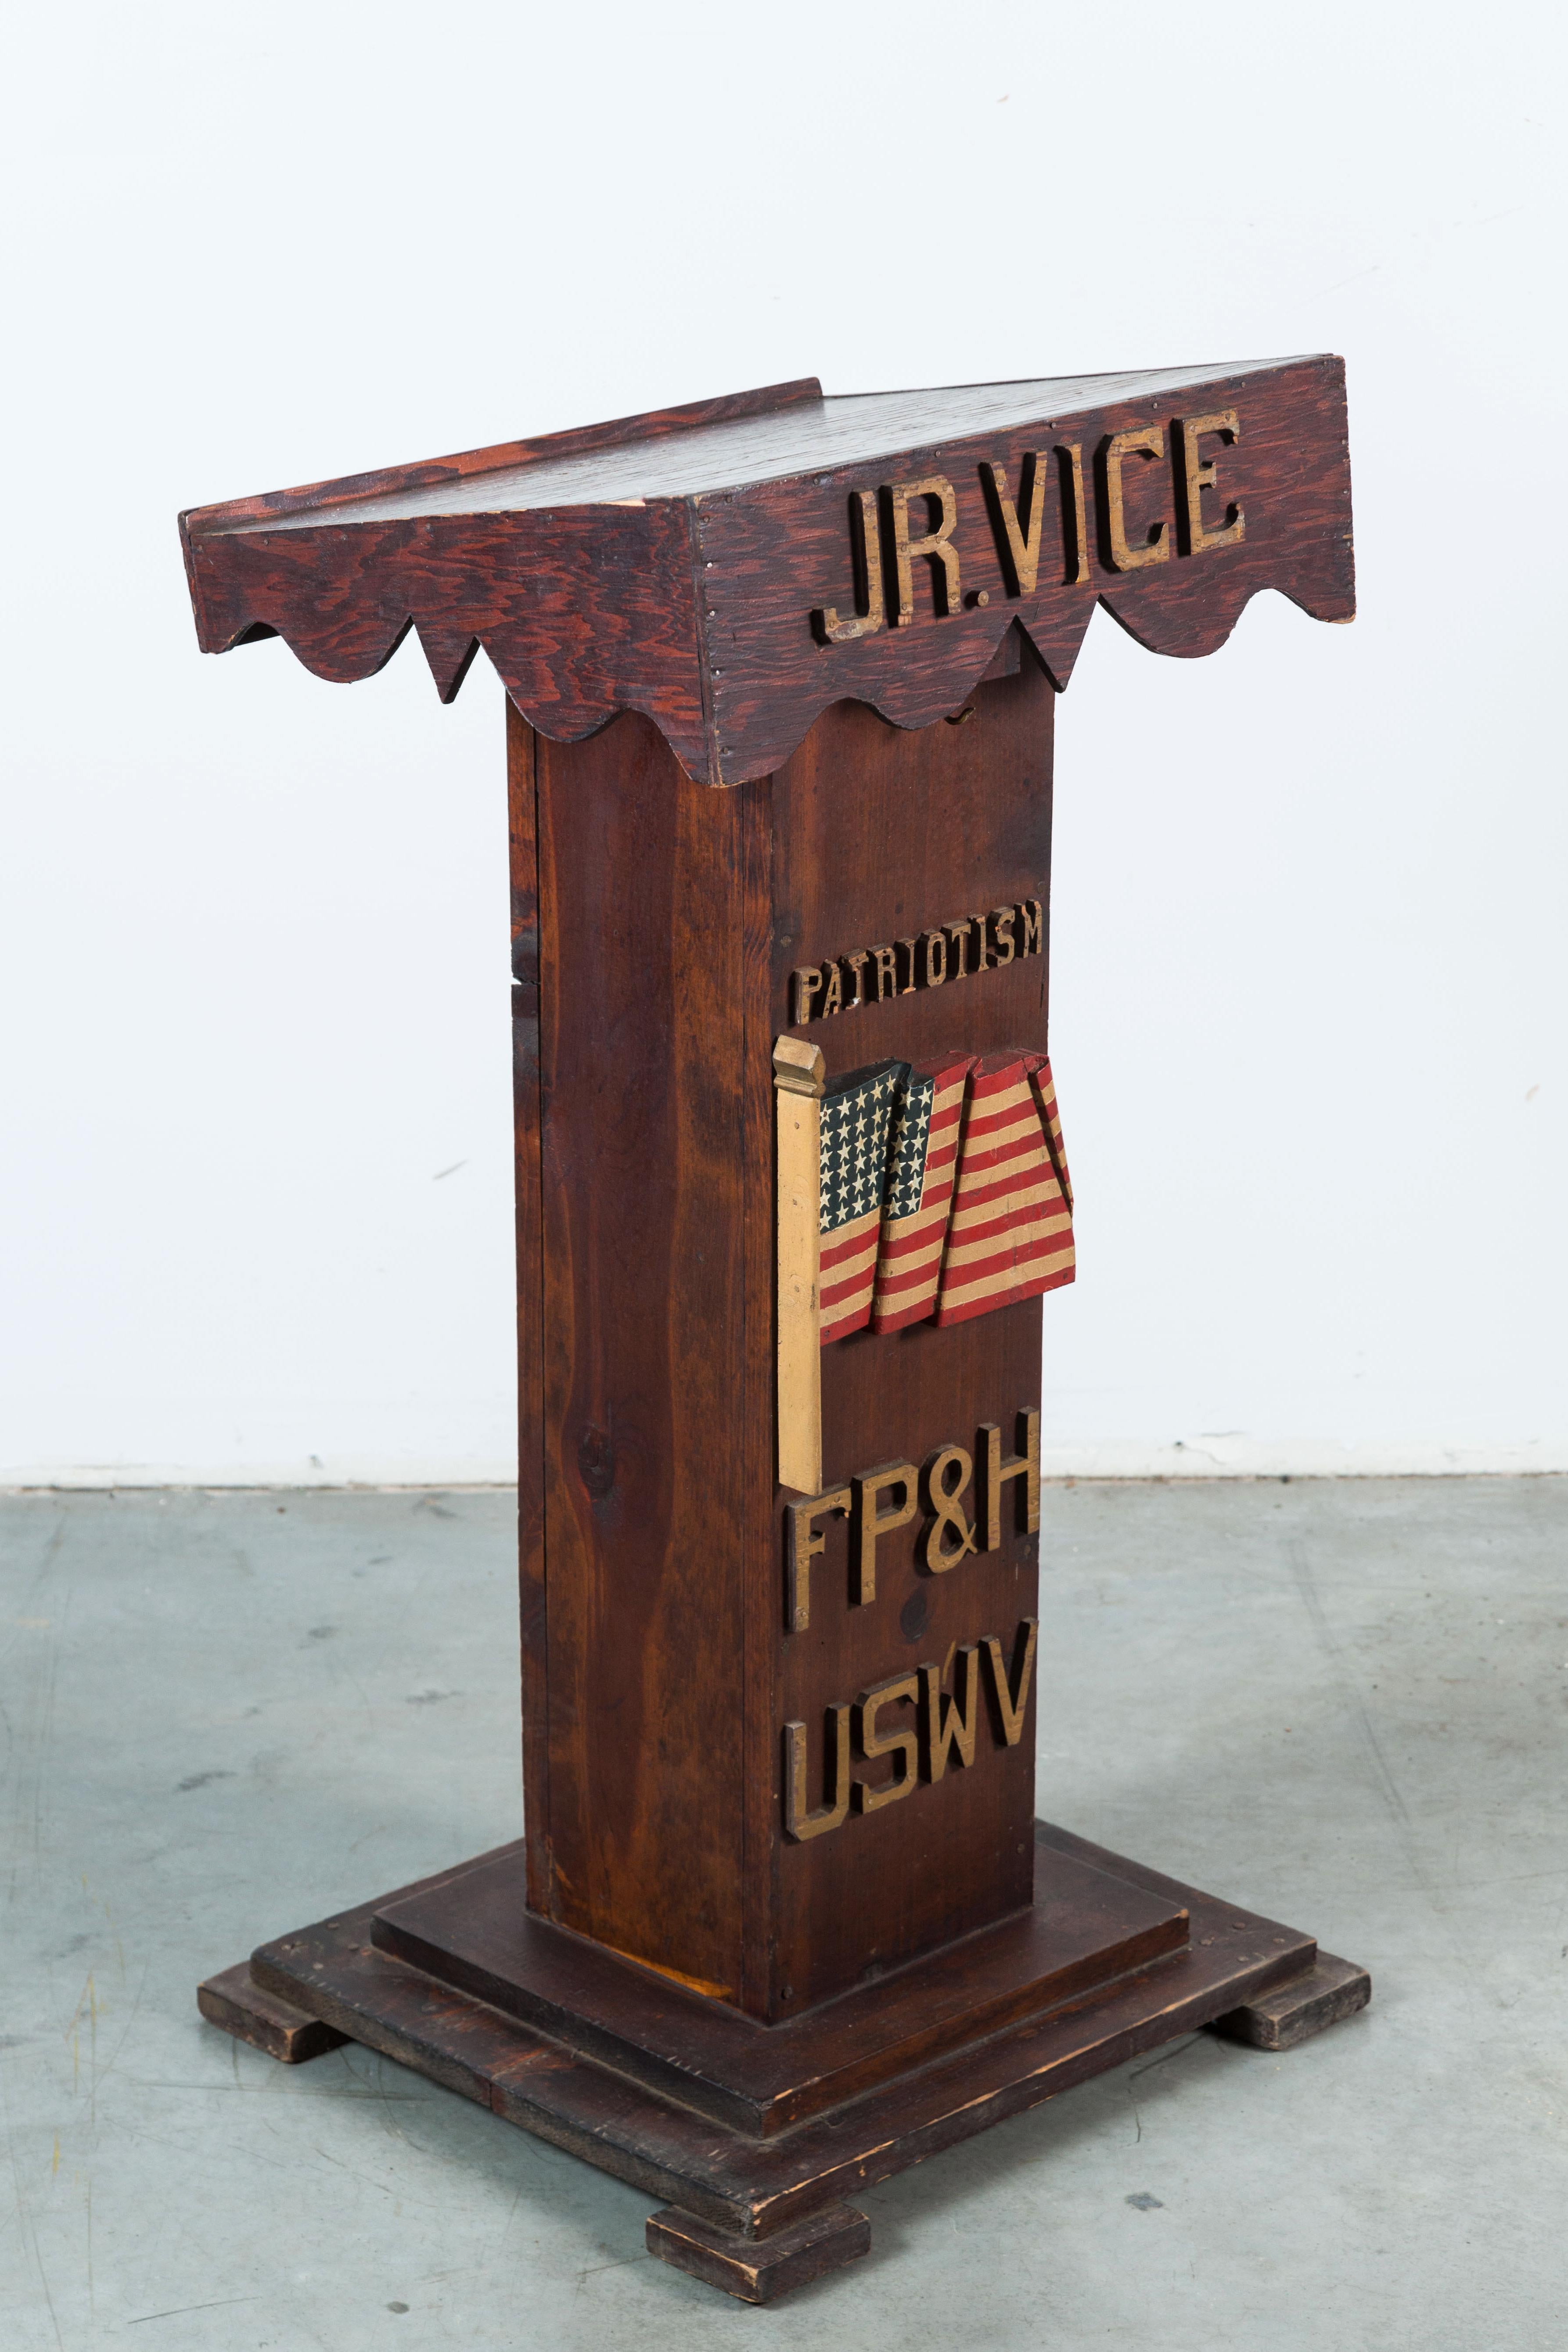 Mid-20th Century Carved USWV Lodge Pedestal Podiums Folk Art American Flag and Clasped Hands For Sale